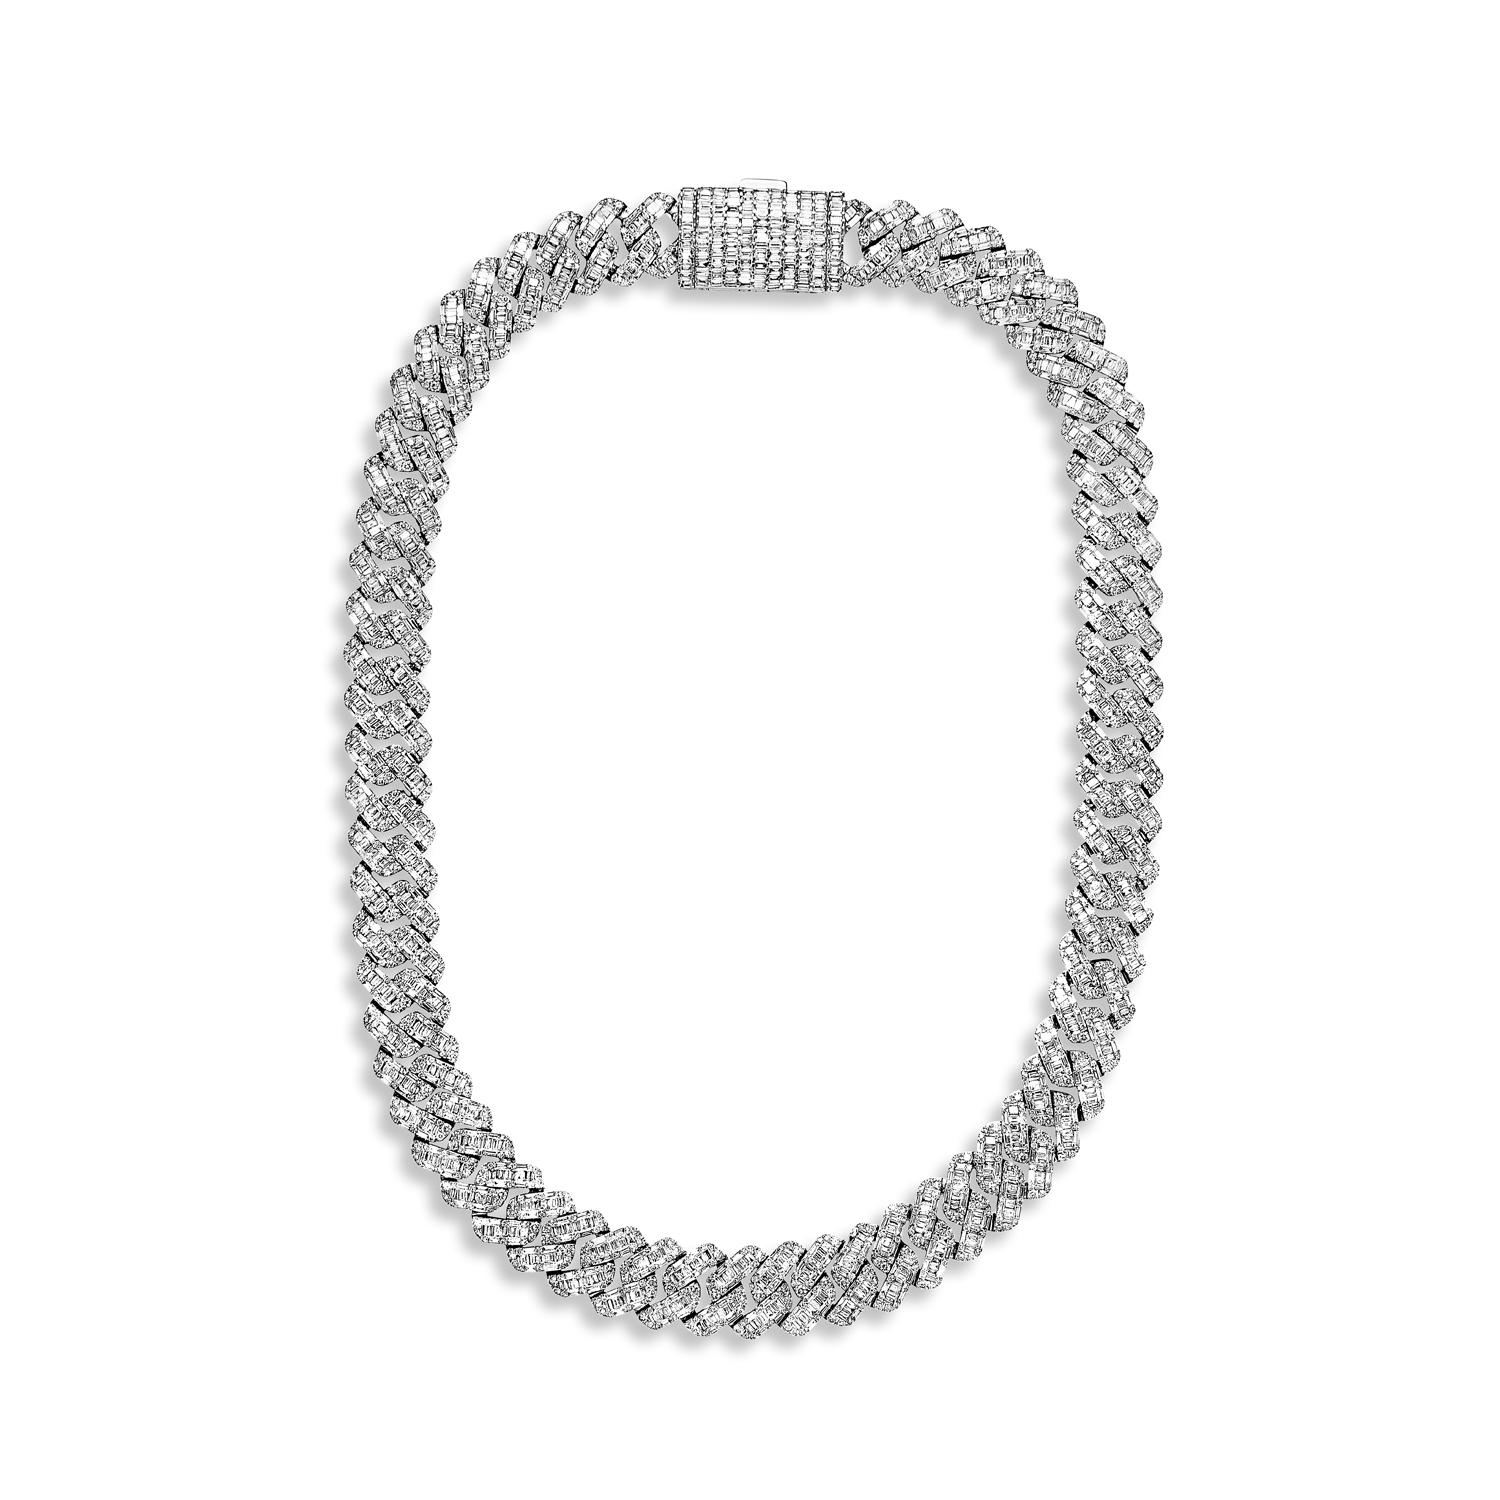 Introducing the Earth Mined Diamonds Cuban Link Chain For Male, a luxurious and one-of-a-kind piece of jewelry. This stunning diamond is mined from the center of the earth, making it extremely rare and valuable. It weighs an impressive 46.19 carats